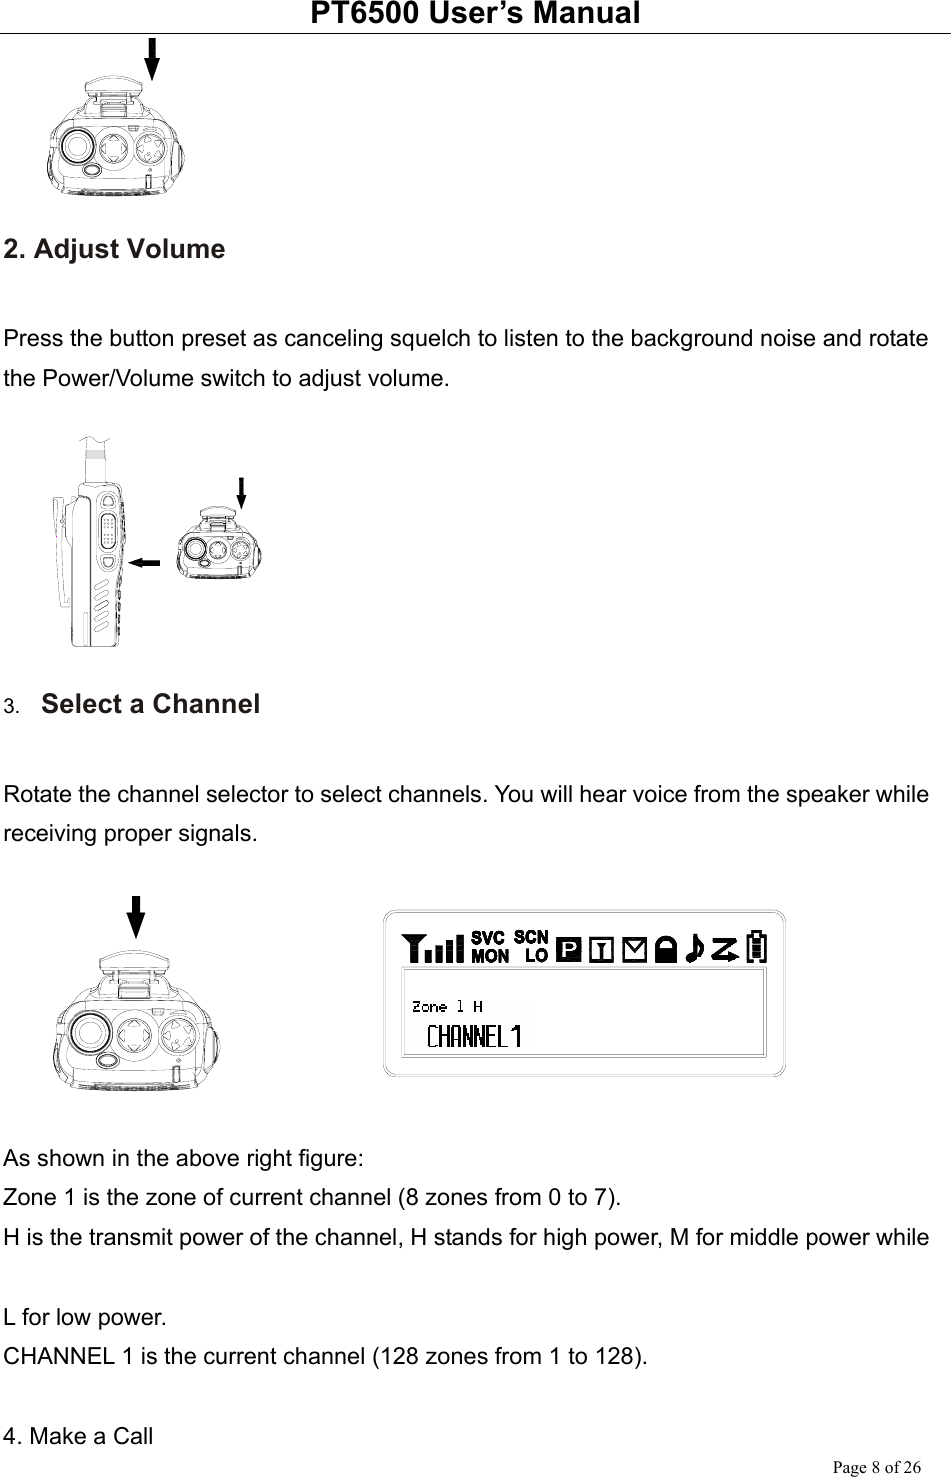 PT6500 User’s Manual Page 8 of 26  2. Adjust Volume  Press the button preset as canceling squelch to listen to the background noise and rotate the Power/Volume switch to adjust volume.   3.  Select a Channel  Rotate the channel selector to select channels. You will hear voice from the speaker while receiving proper signals.    As shown in the above right figure: Zone 1 is the zone of current channel (8 zones from 0 to 7). H is the transmit power of the channel, H stands for high power, M for middle power while    L for low power. CHANNEL 1 is the current channel (128 zones from 1 to 128).        4. Make a Call 